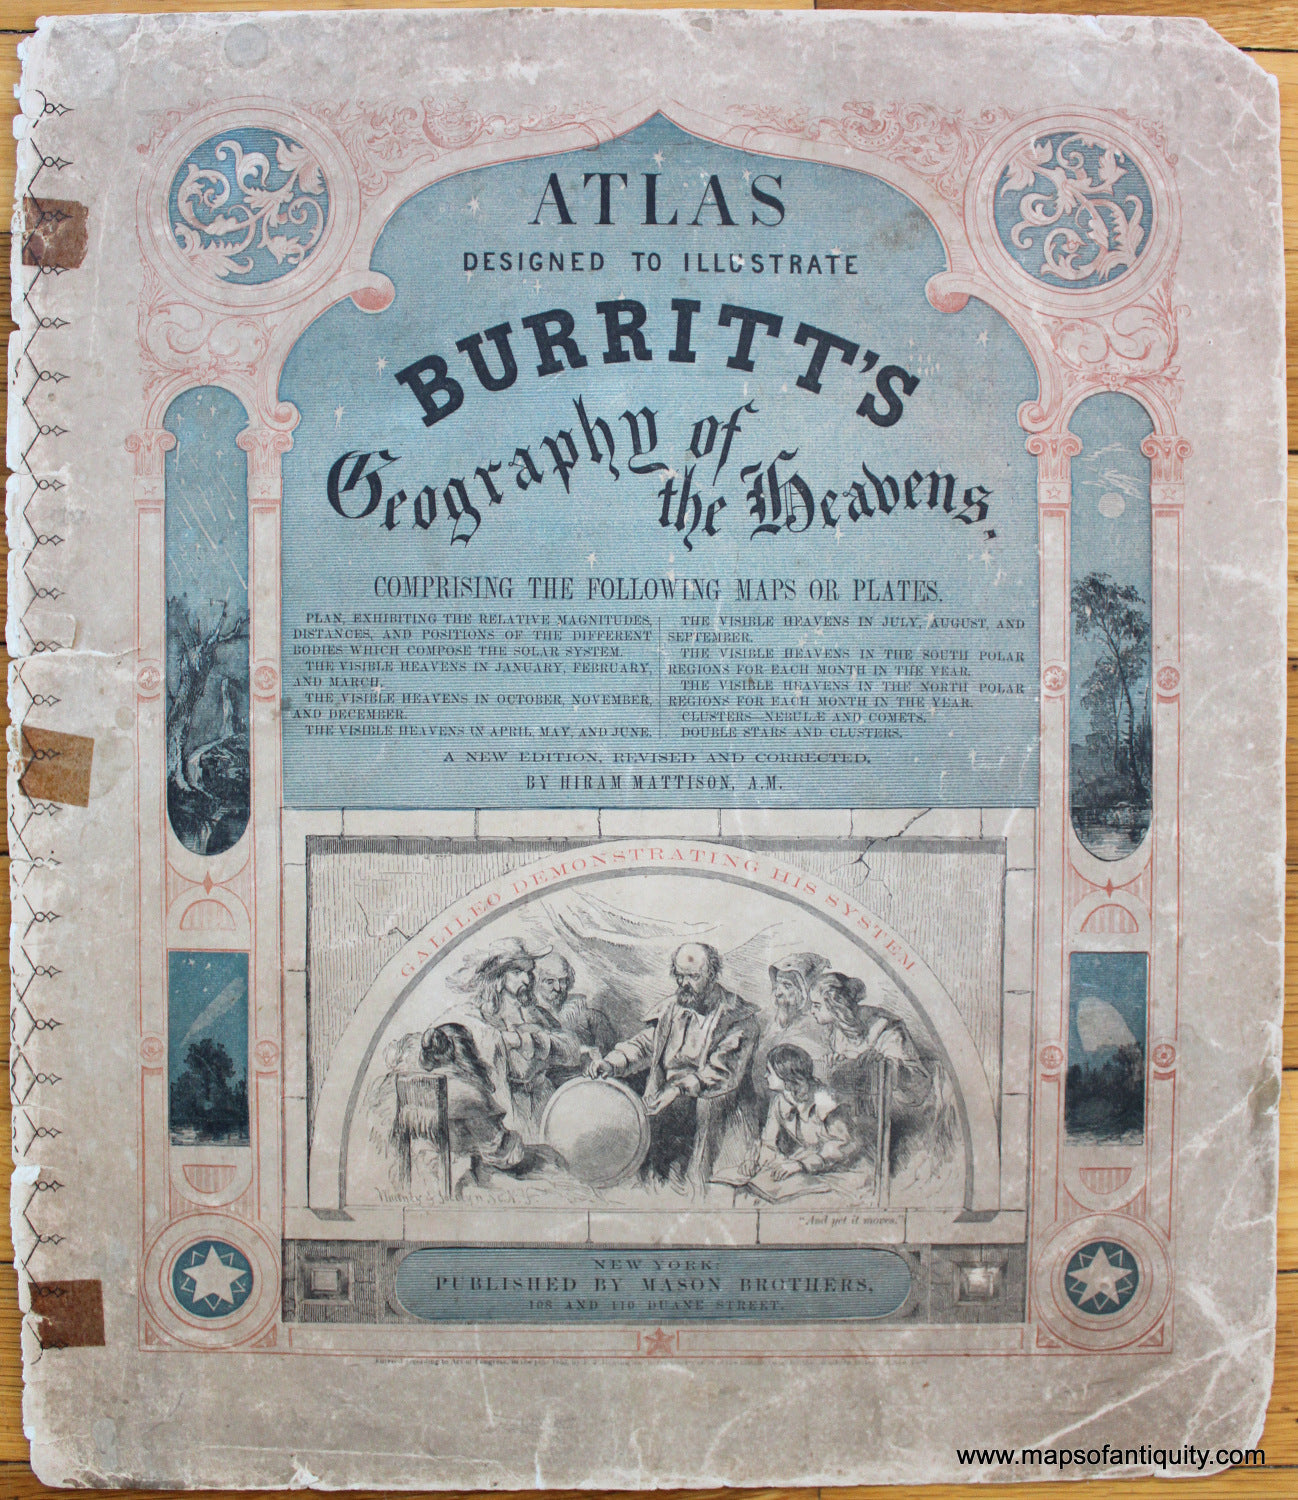 Atlas-Cover-Page-Burritt's-Geography-of-the-Heavens-Cover-Page--Celestial--1856-Burritt-Maps-Of-Antiquity